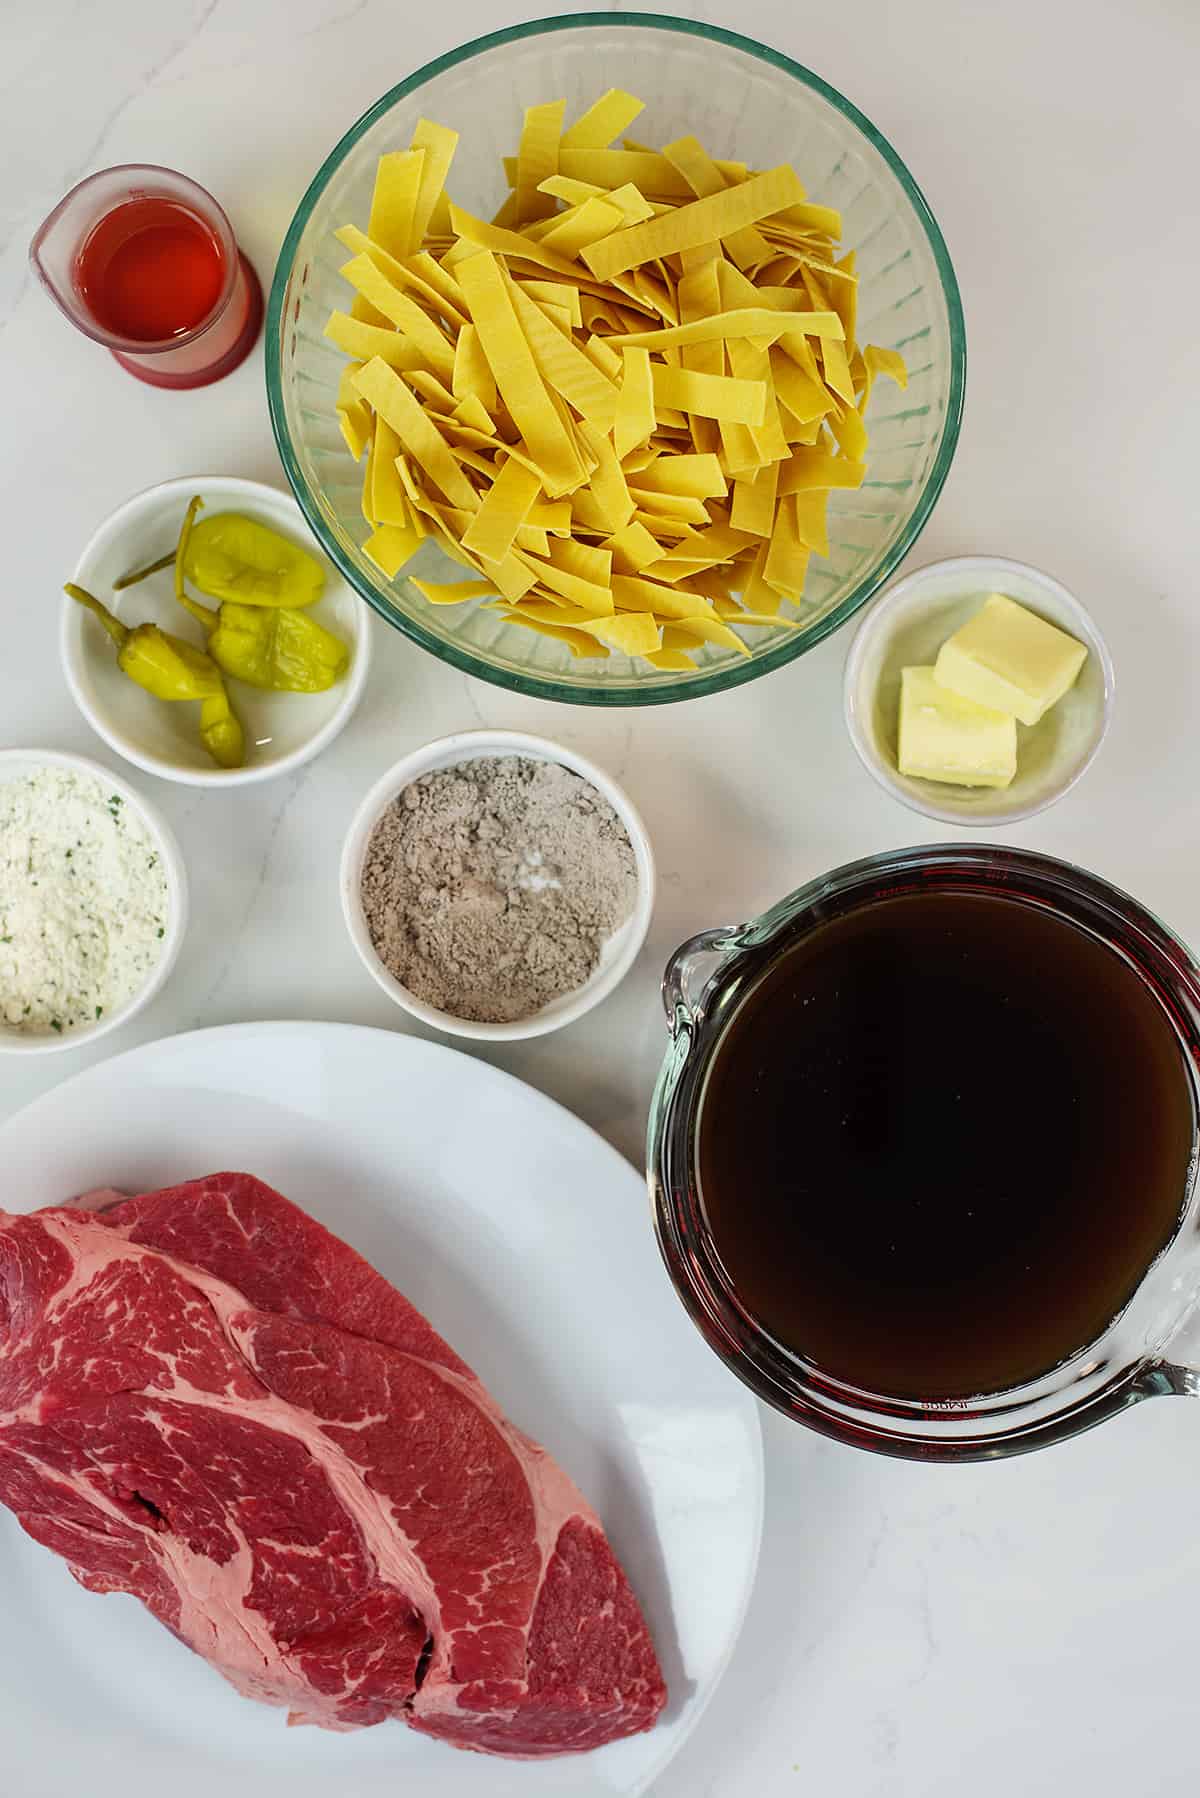 Ingredients for Mississippi beef and noodles.